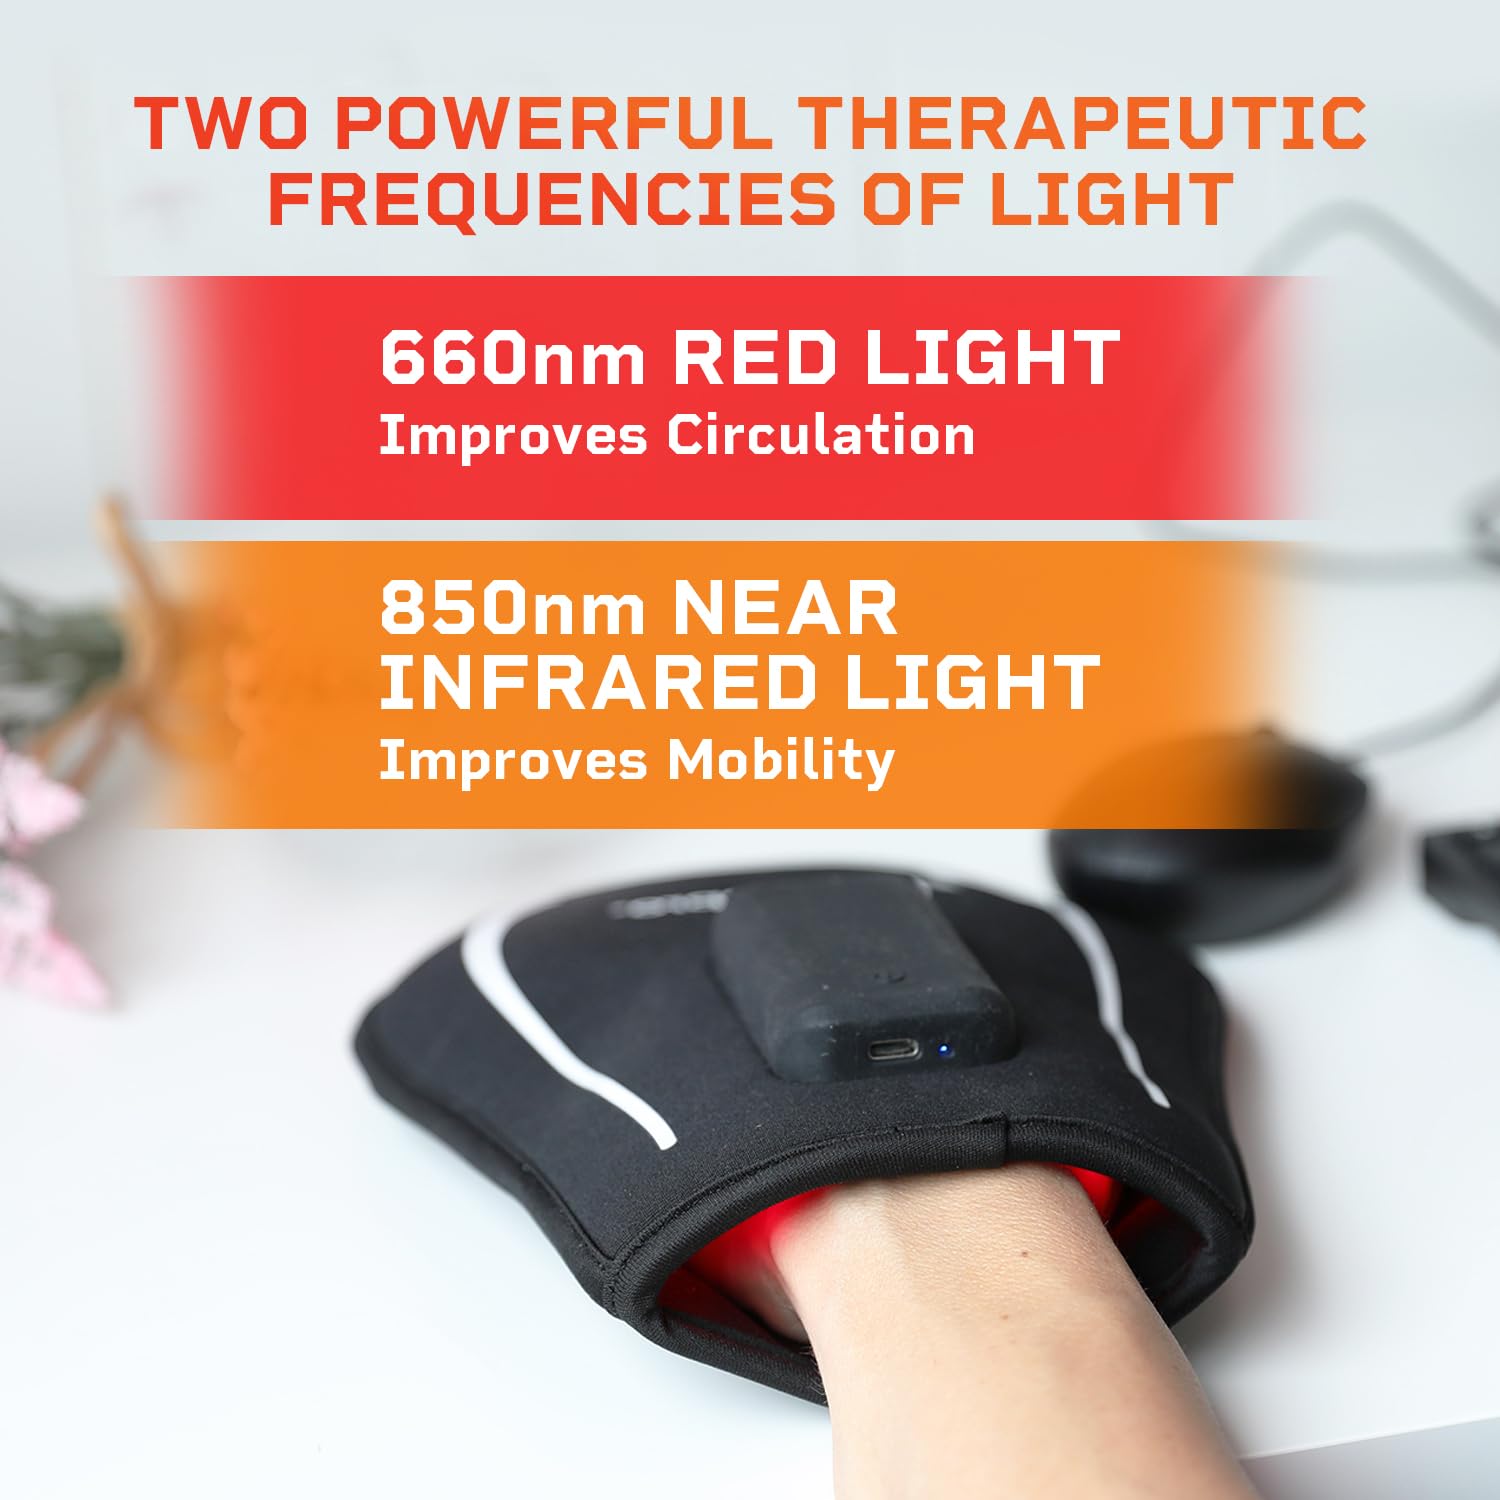 LifePro Red Light Therapy Glove - Rechargeable LED Near Infrared Light Therapy Hand Stiffness Glove - Red Light Therapy at Home - Red Light Therapy Device Glove or Light Therapy Products